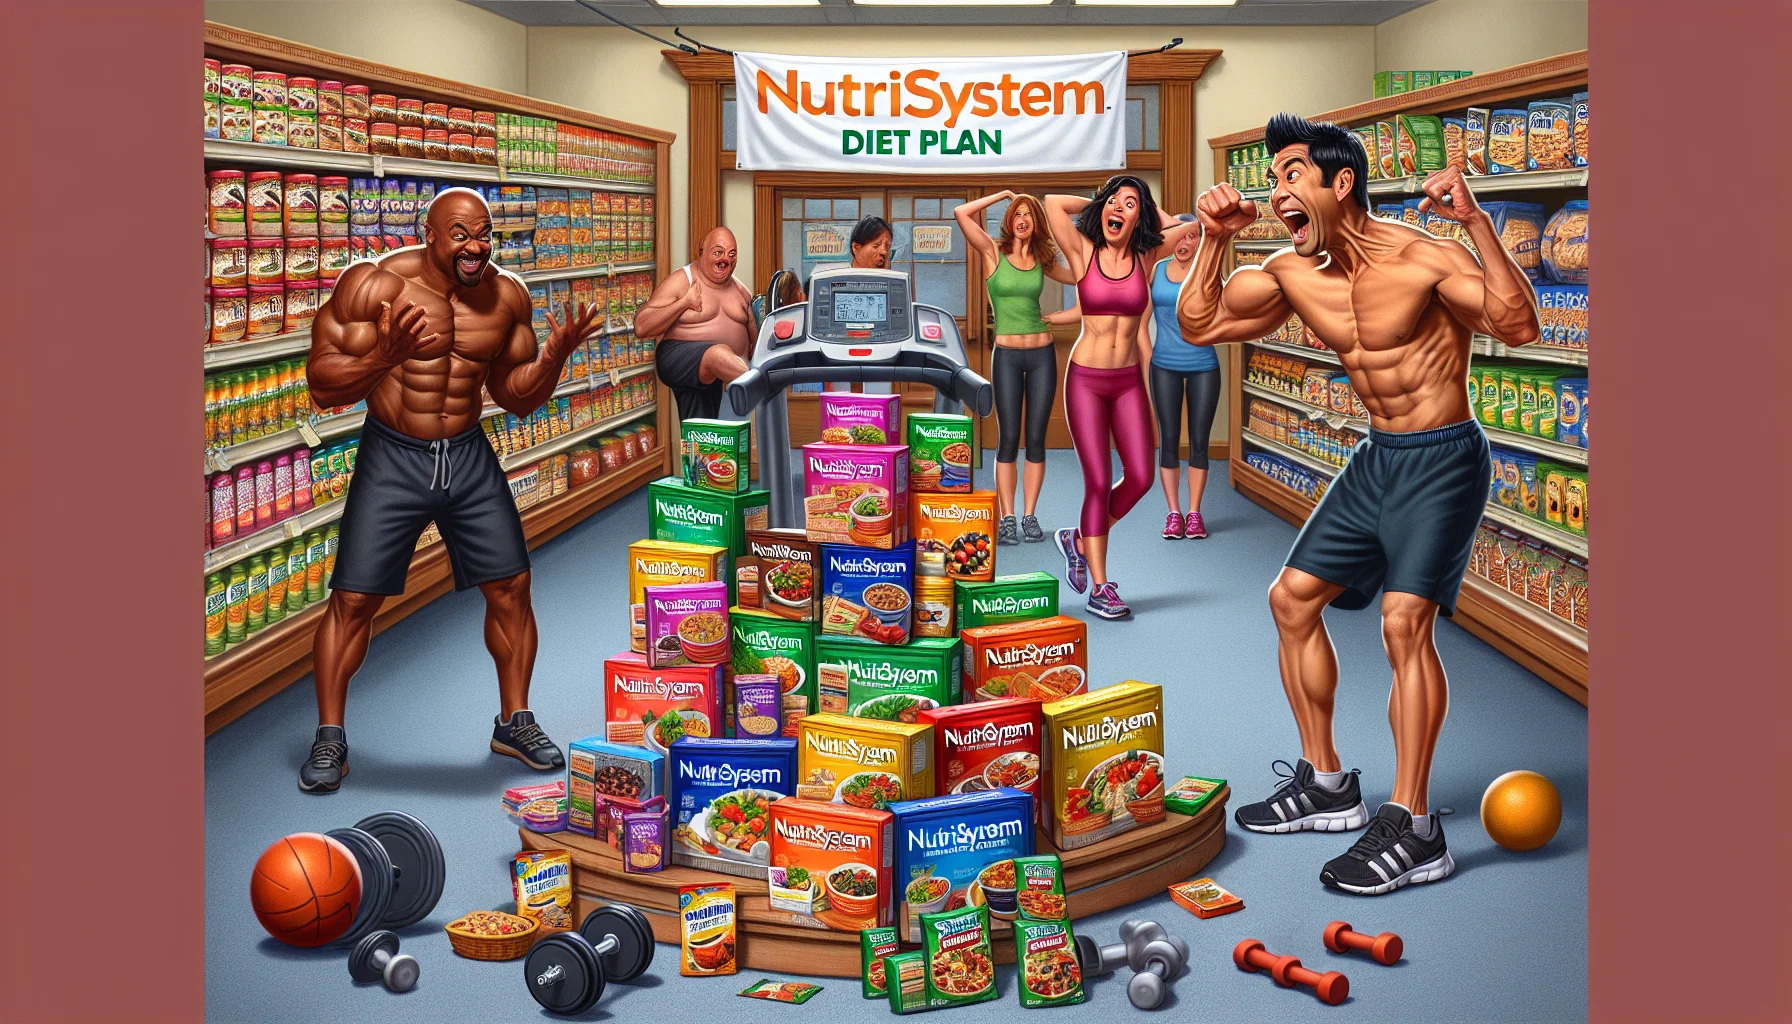 Create a humor-filled image that captures the essence of a Nutrisystem diet plan, but from a fitness perspective. The scene features a grocery store's health food aisle where there is an array of colorfully packaged diet-friendly foods grouped under a banner that says 'Nutrisystem Diet Plan'. A South Asian woman, energized and fit, is humorously juggling some of the diet food packages, while a muscular African man in workout gear raises his eyebrow in surprise. Adjacent to the aisle is a fitness area with an exercise mat, dumbbells, and a treadmill. A Middle Eastern man is laughing while attempting to balance himself on an exercise ball, and a Caucasian woman is doing yoga, looking intrigued by the diet plan. This should catch the viewer's attention and inspire them to engage in a healthy lifestyle.